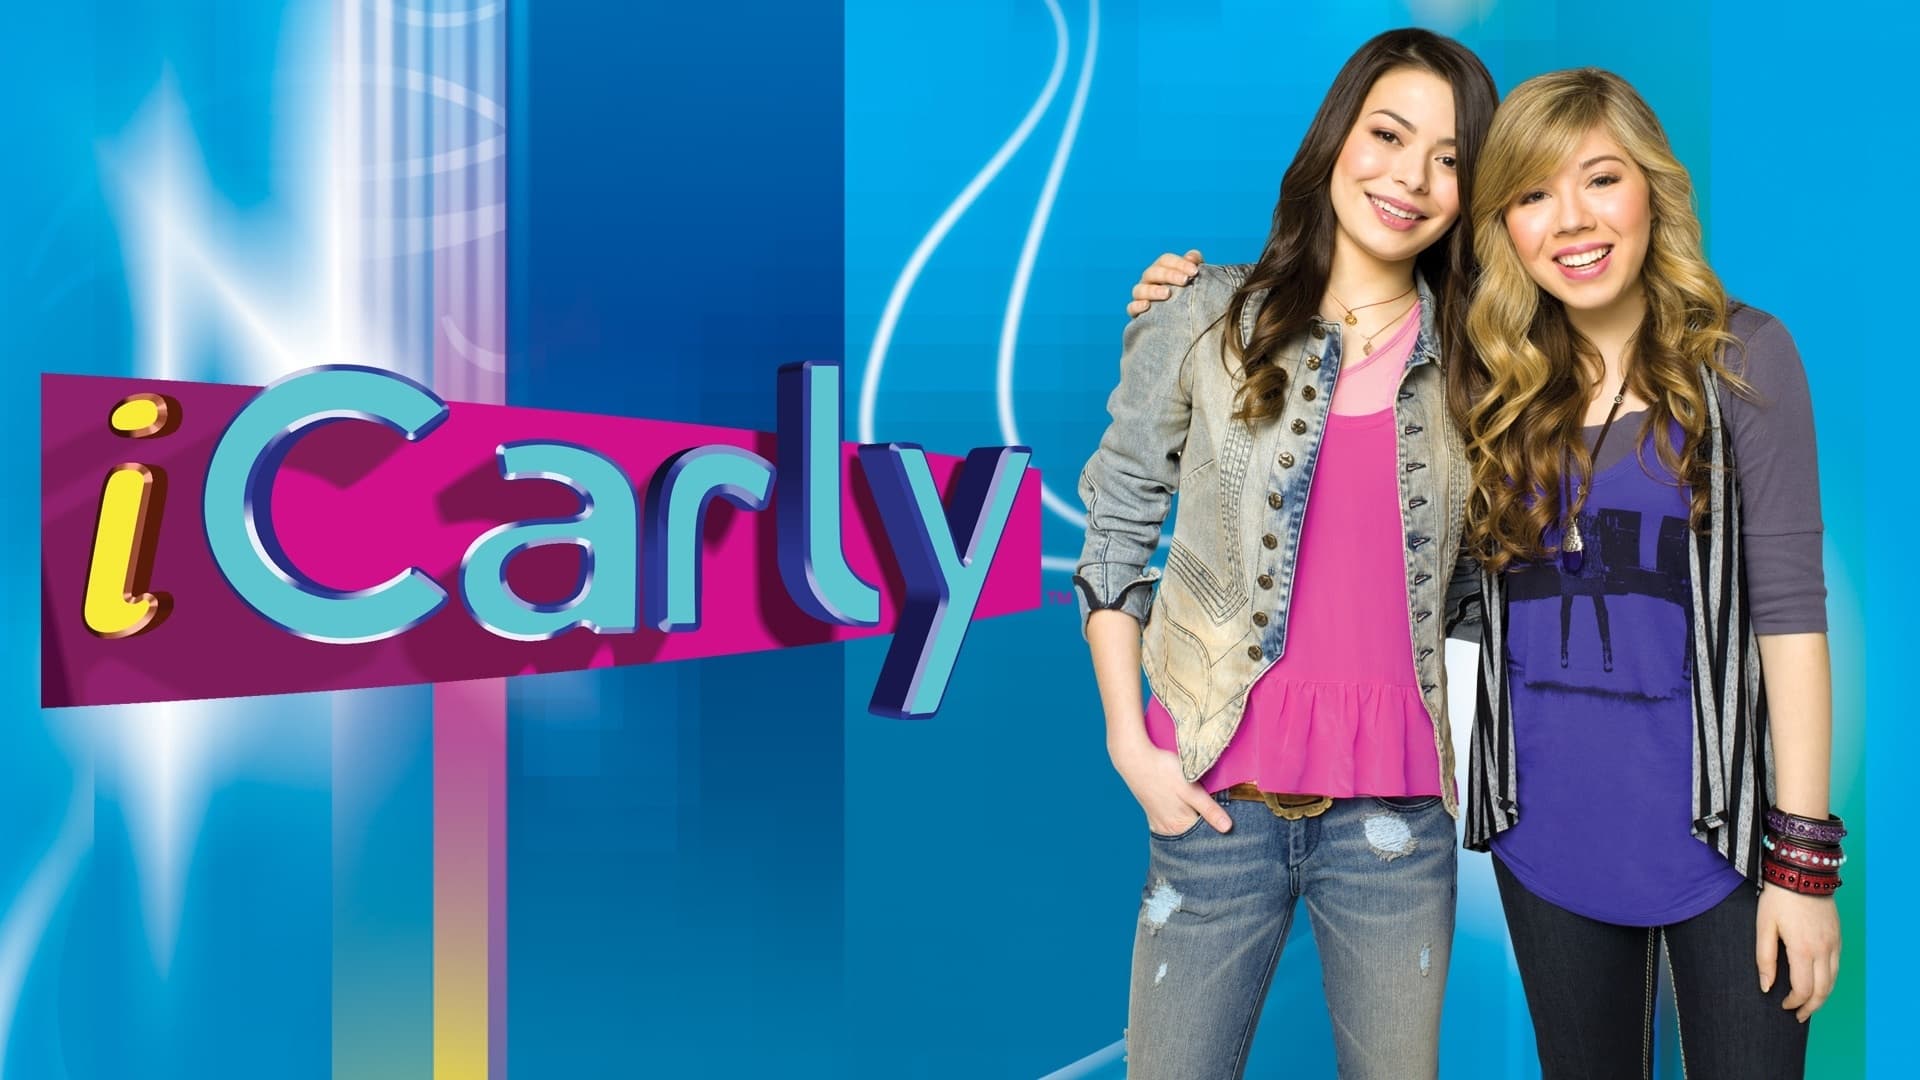 Promo iCarly Coming This Fall - Nickelodeon (2007) .